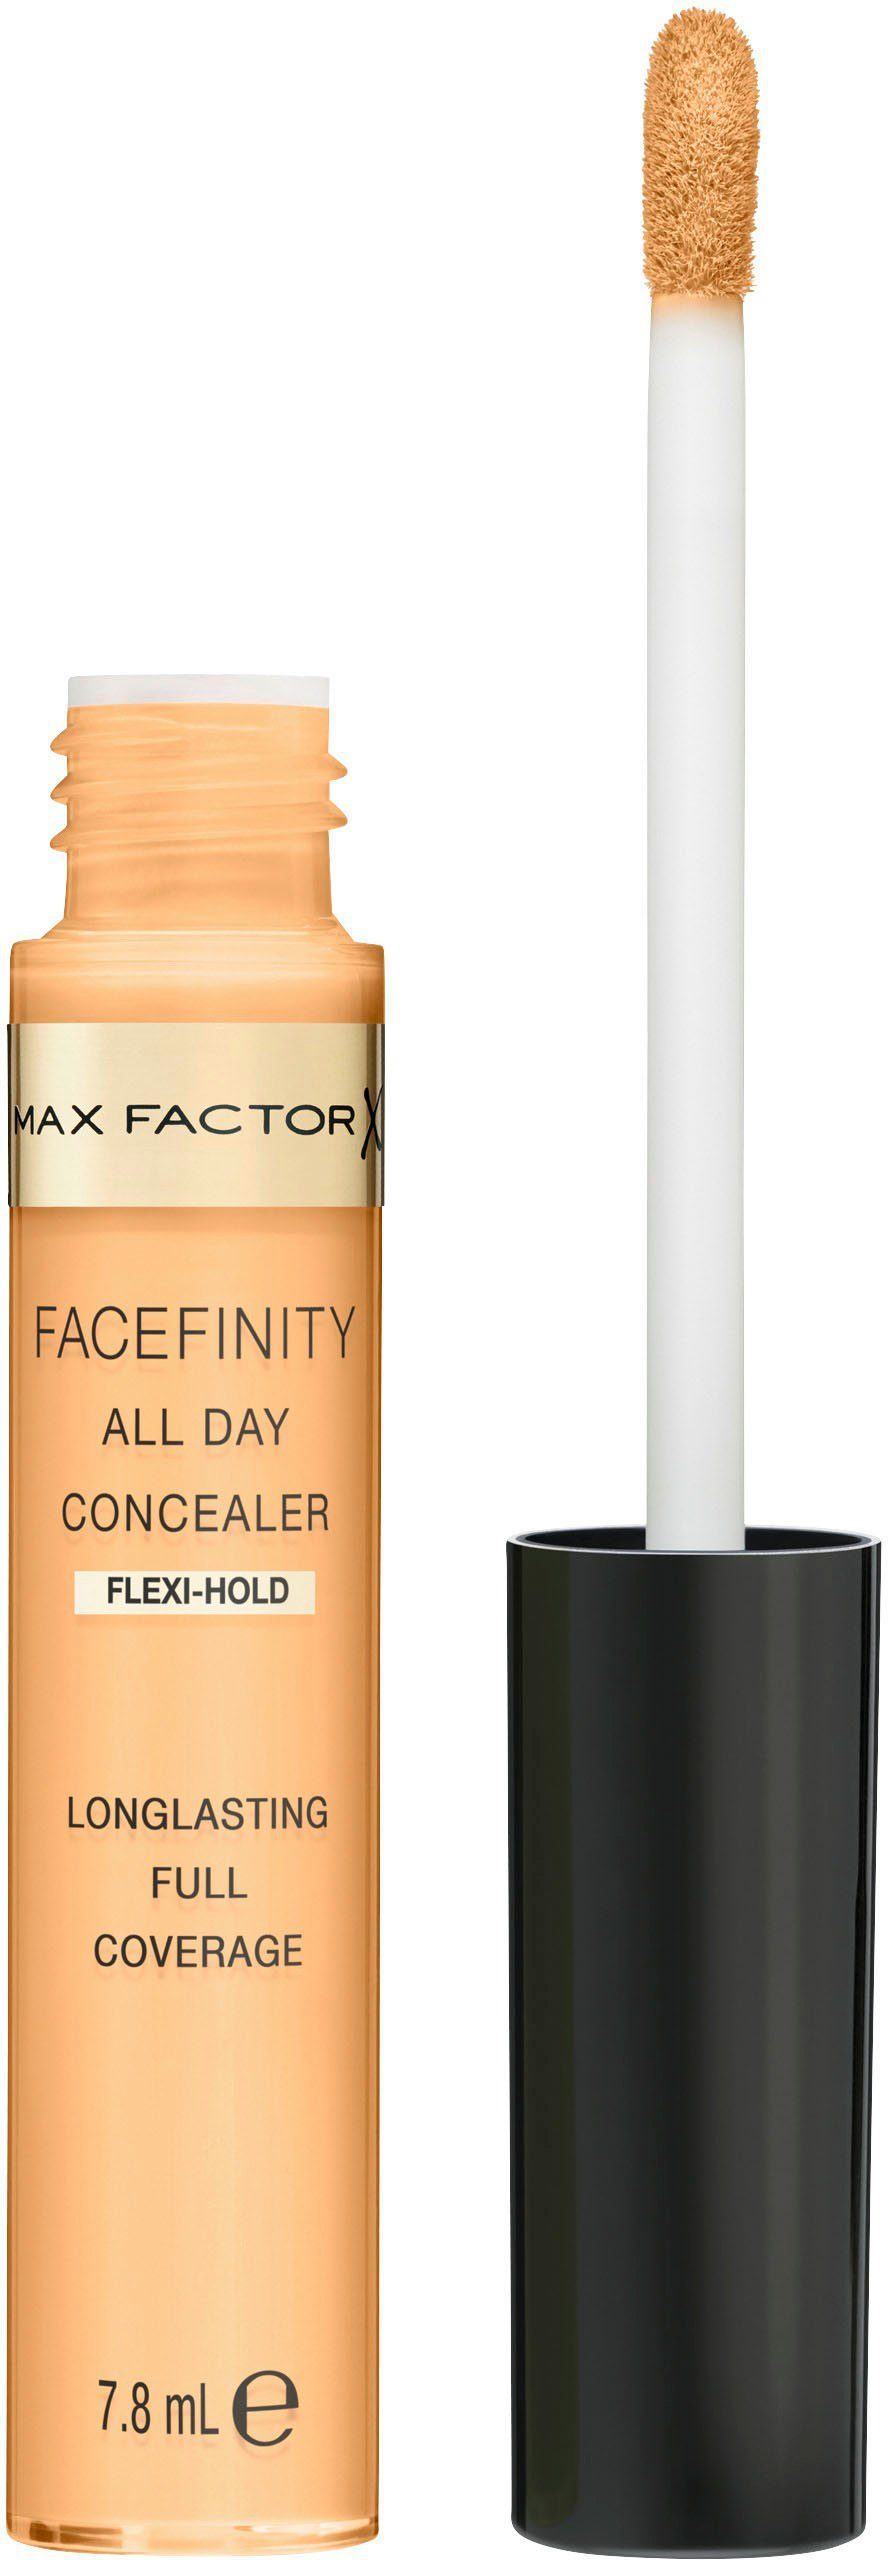 MAX FACTOR Concealer FACEFINITY All Day Flawless 40